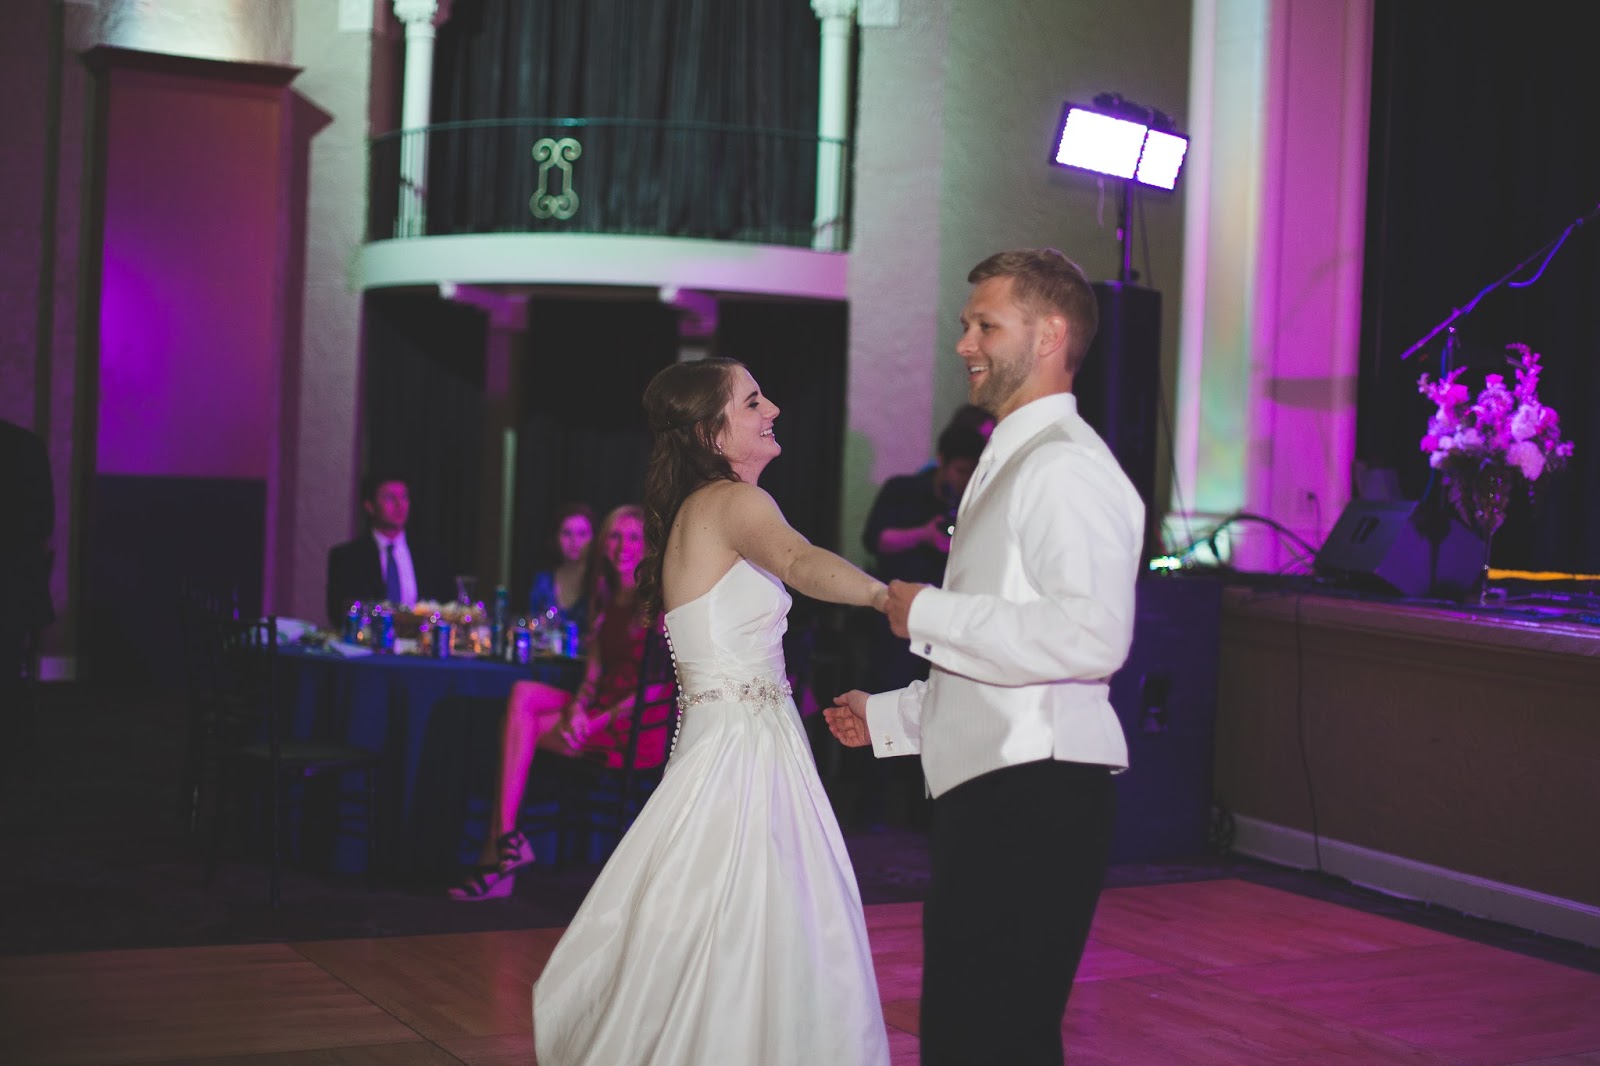 pictures of your first dance | a memory of us 